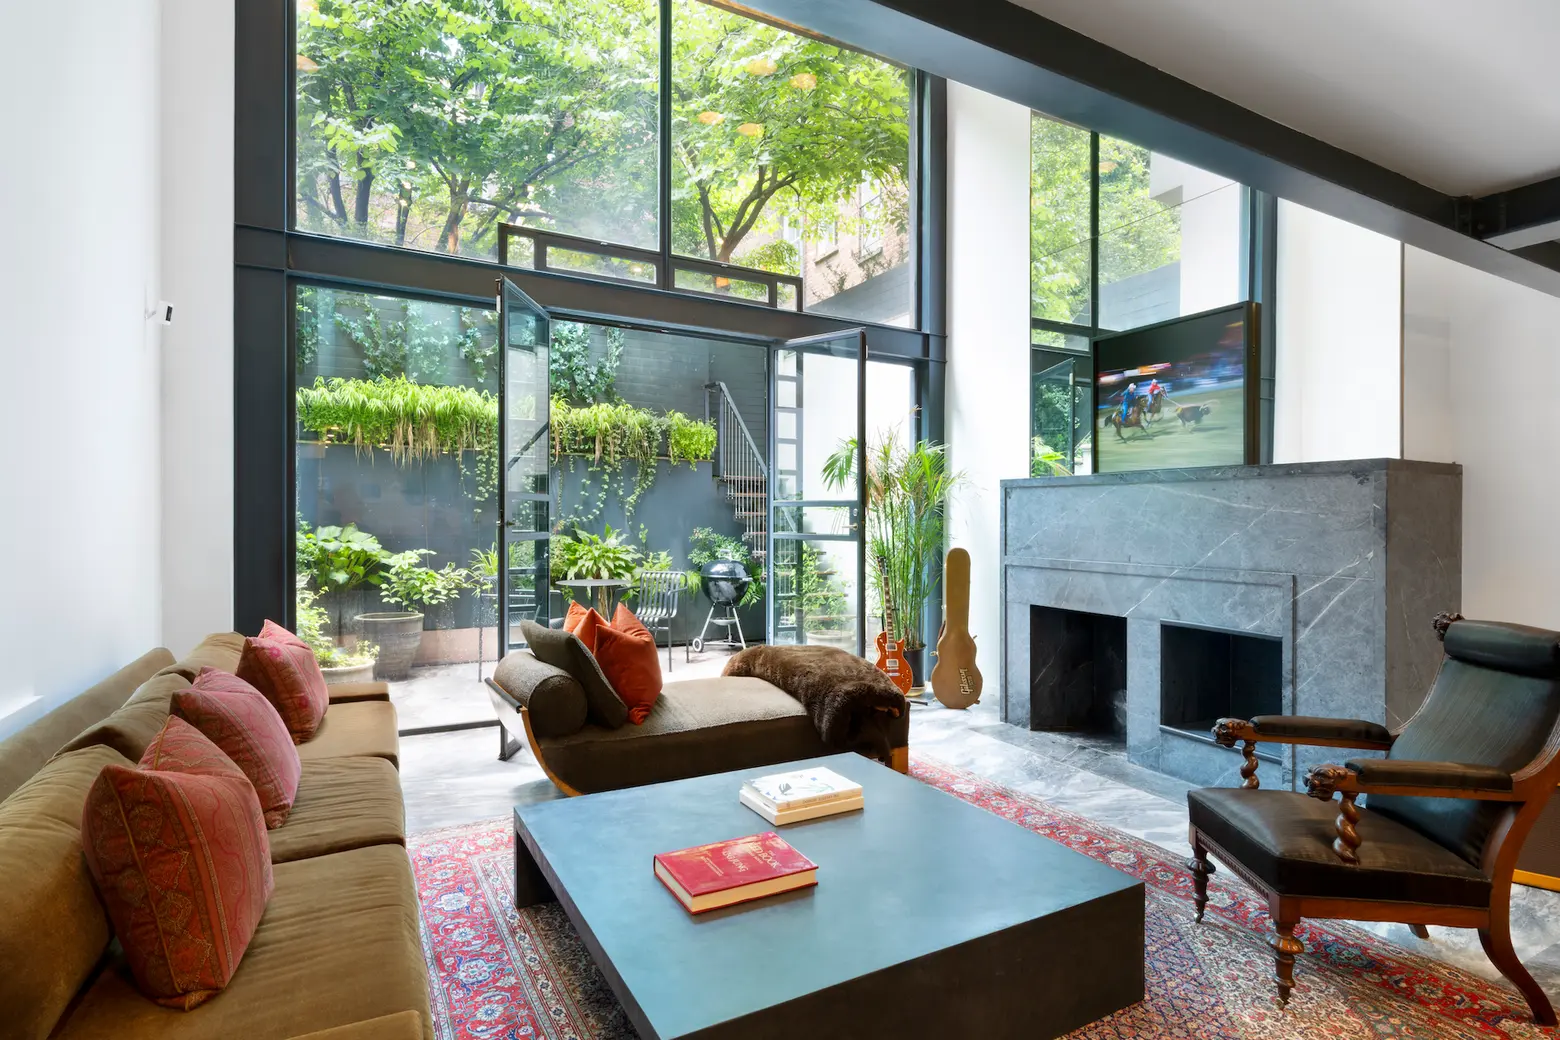 Historic West Village rowhouse has a modern garden and glass addition for $11M